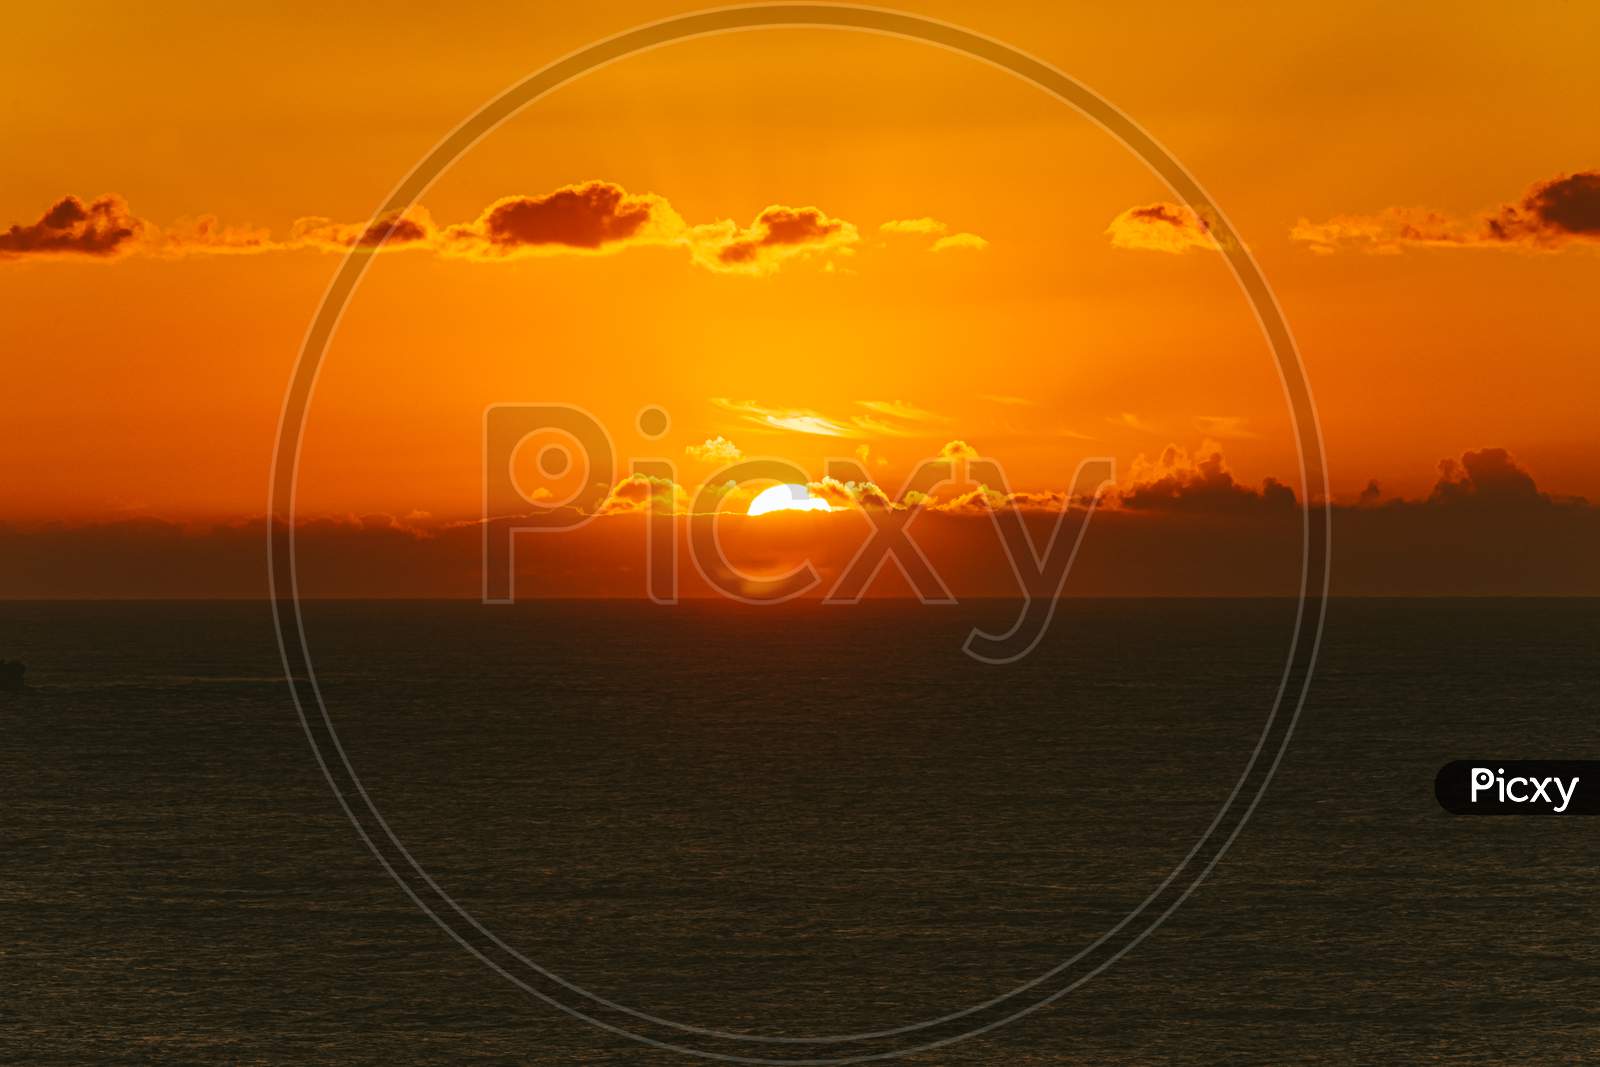 Massive Clouds Over The Horizon During A Colorful Sunset With A Giant Sun With Copy Space